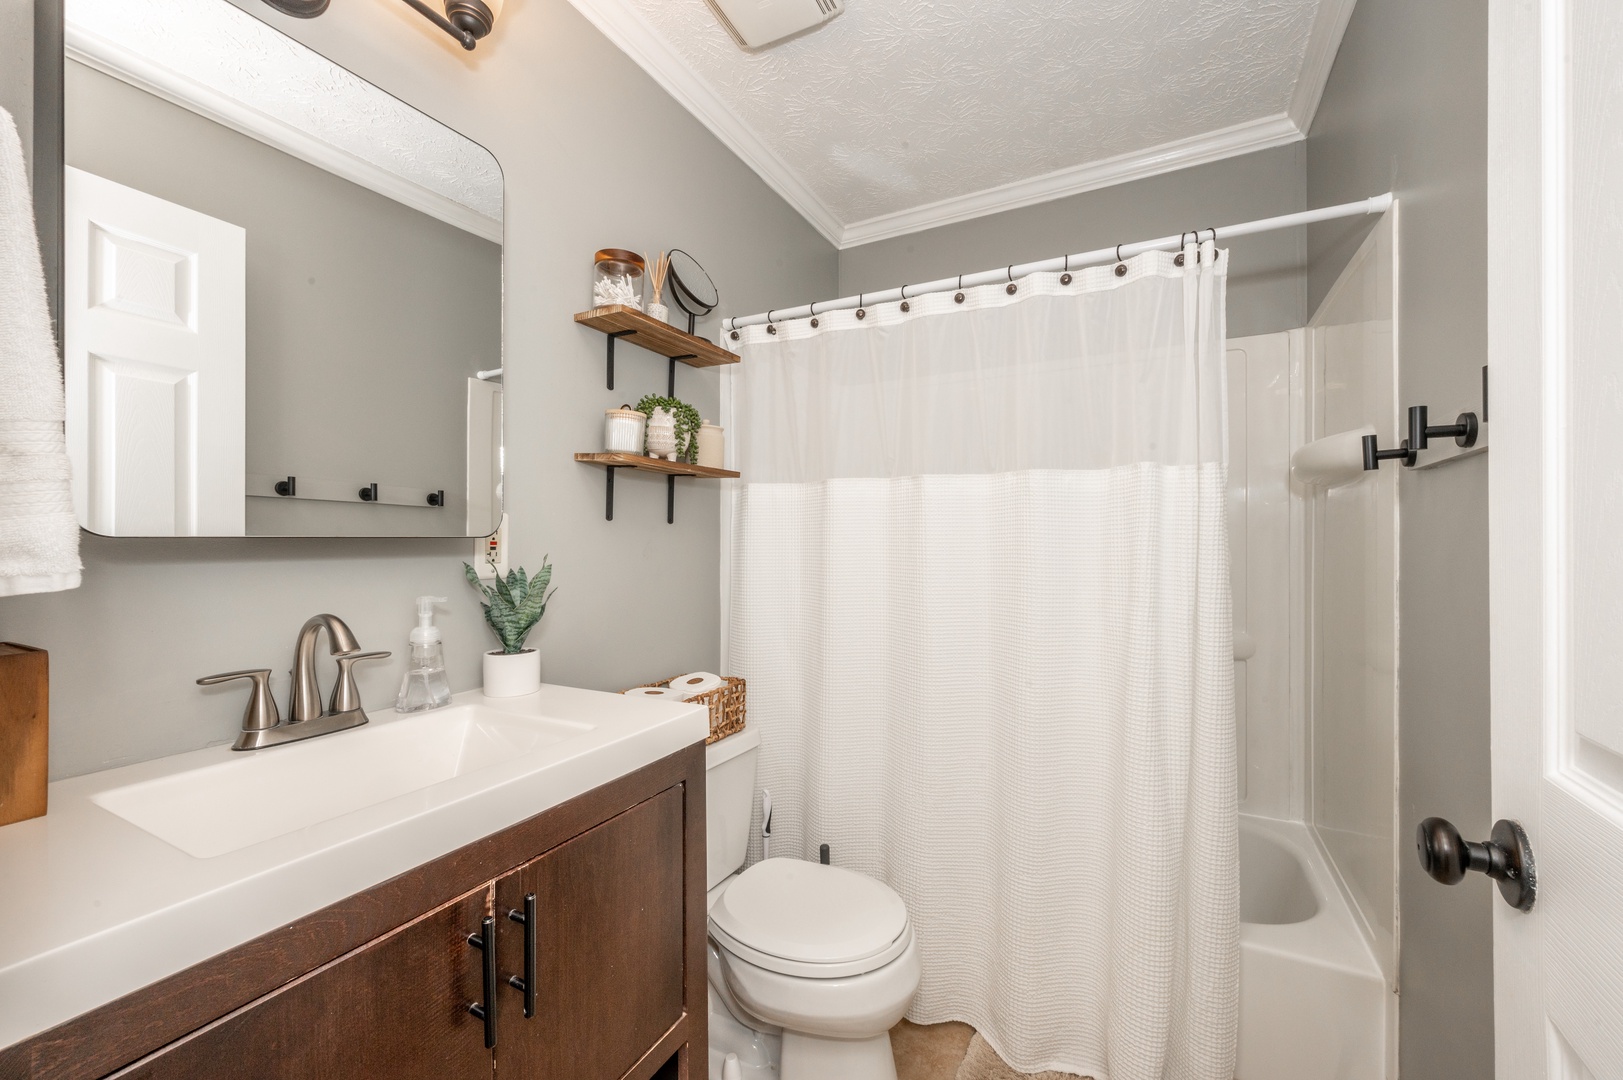 The upper-level full bathroom includes a single vanity & shower/tub combo